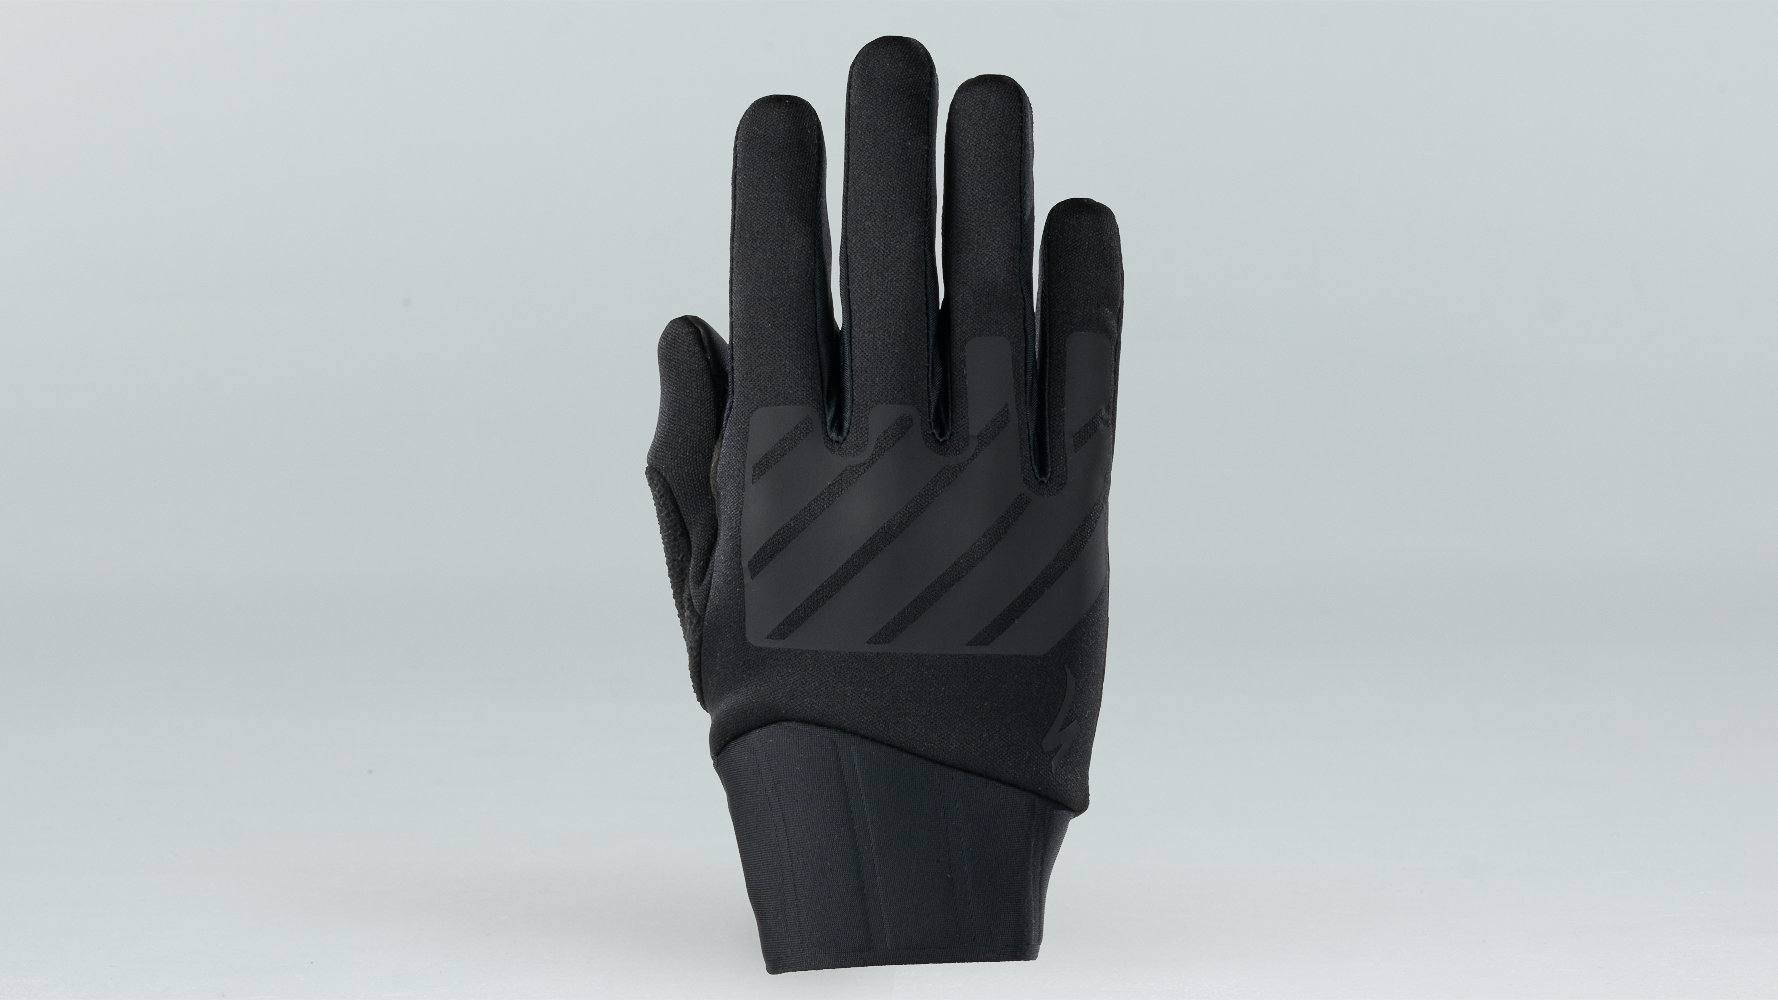 specialized gloves mens